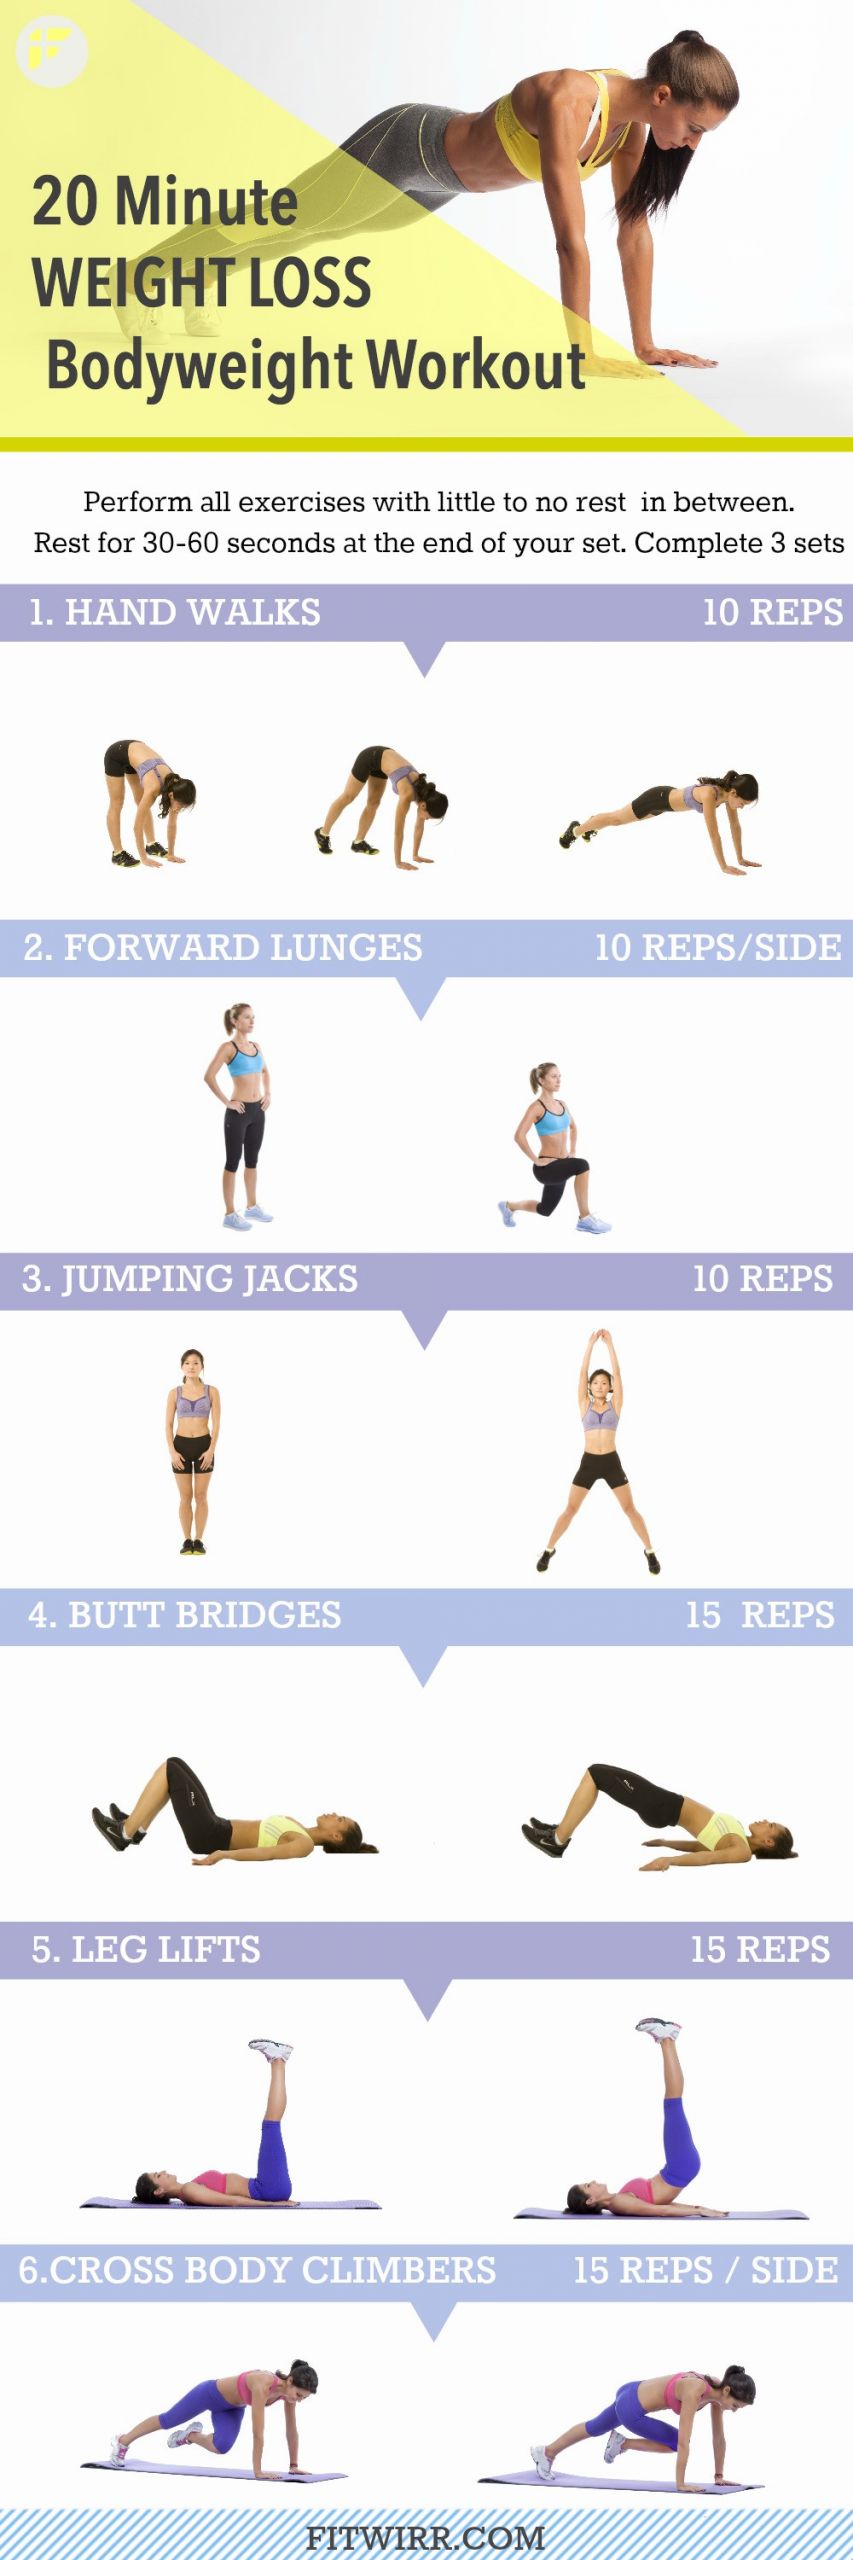 Weight Loss Exercises Gym Work Outs
 The Absolute Best Workout to Lose Weight Burn Fat and